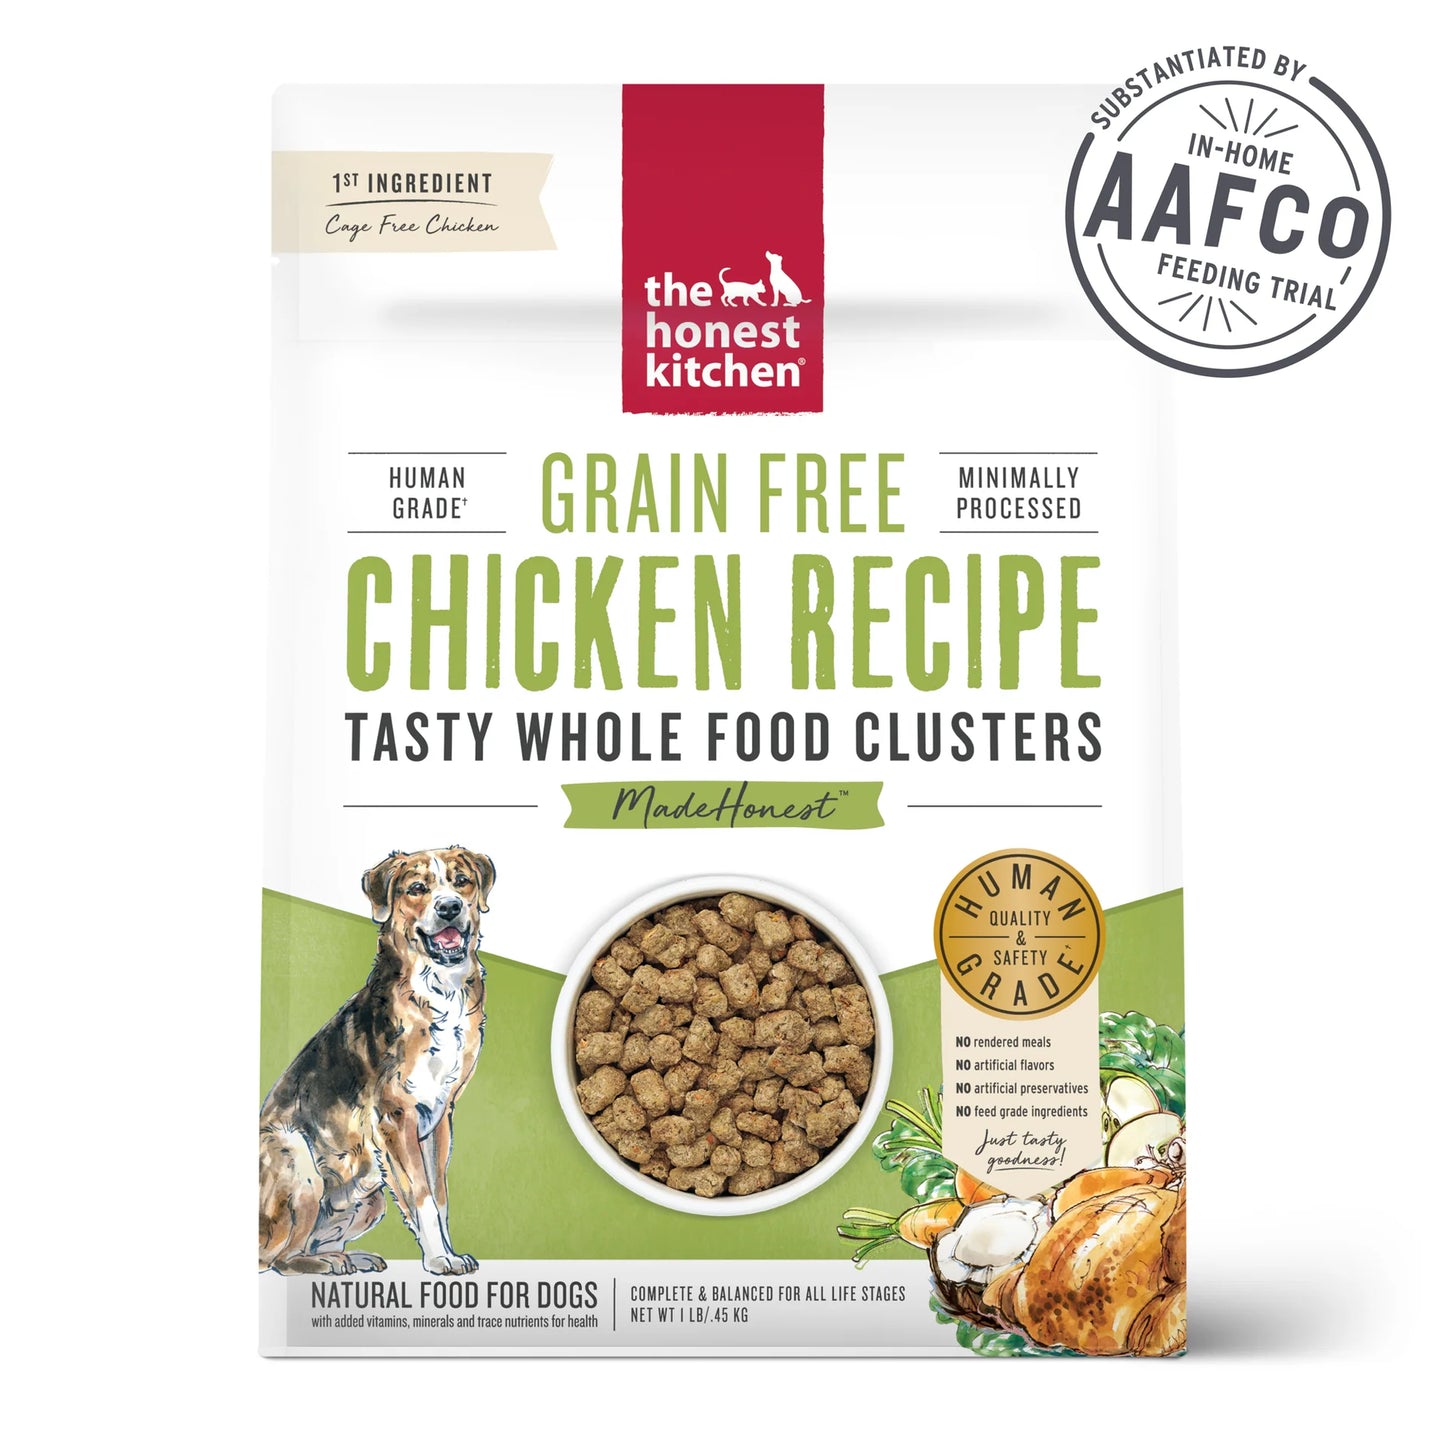 Grain Free Whole Food Clusters